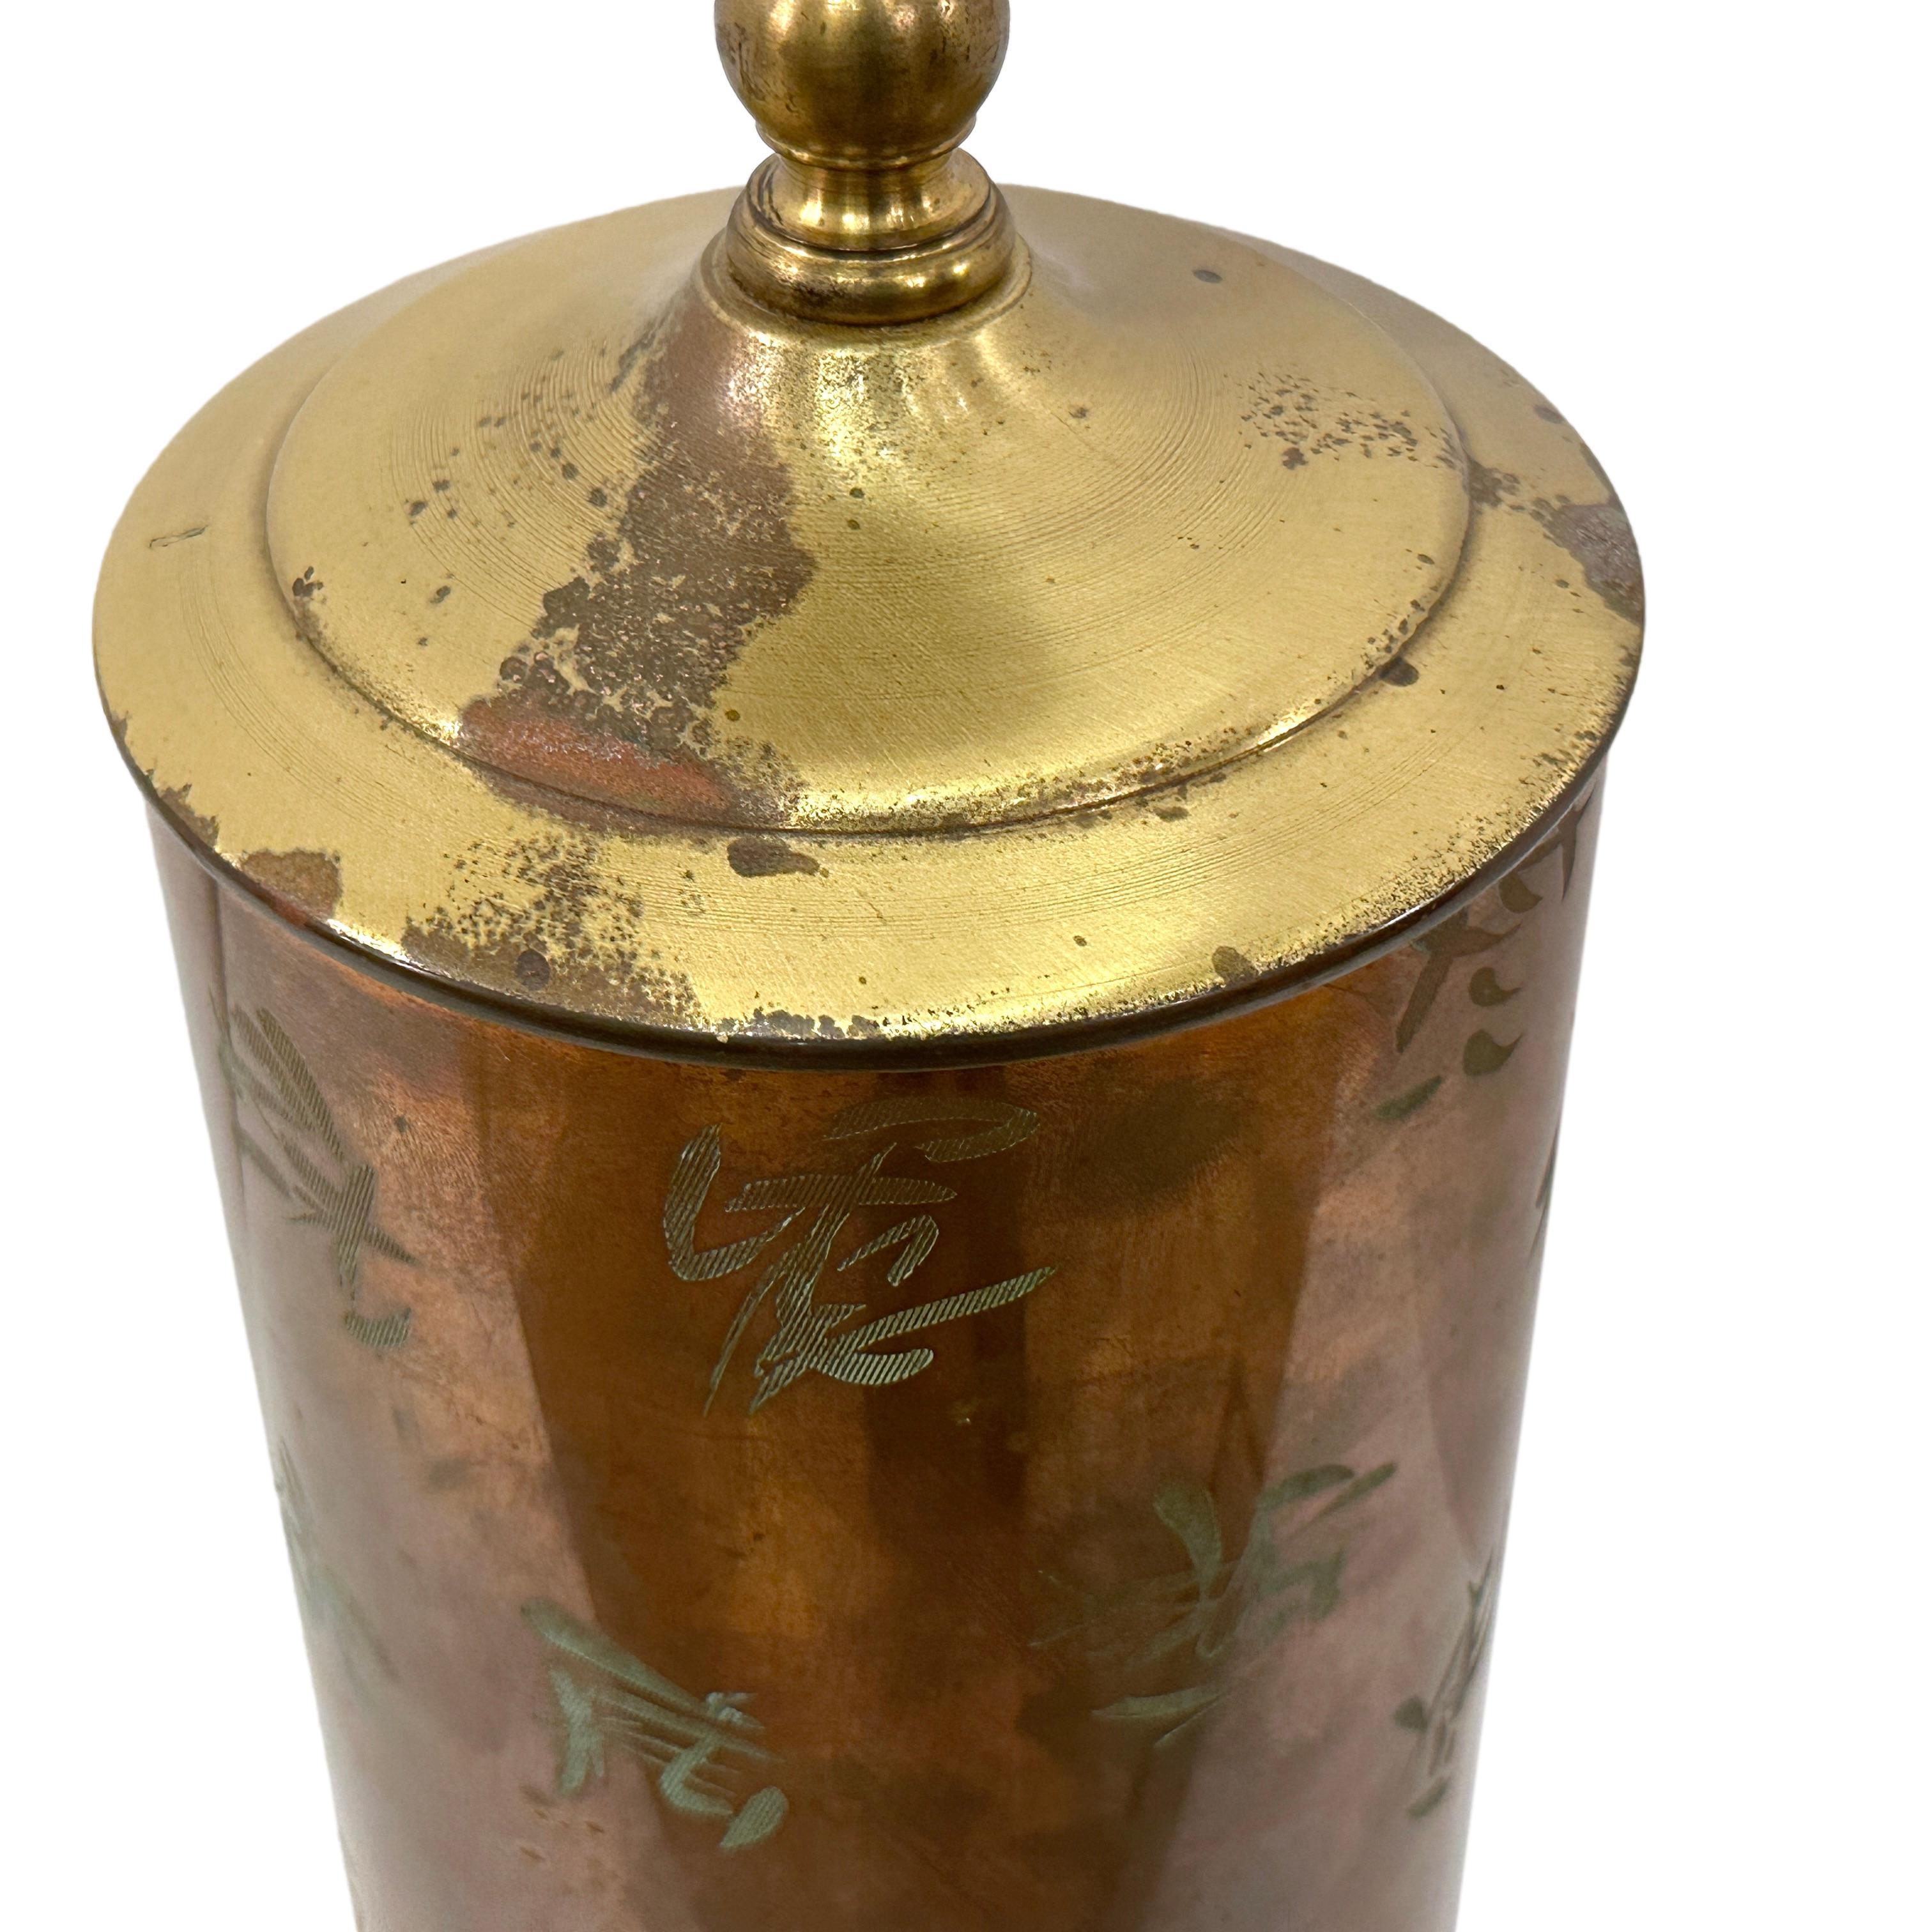 A circa 1900 etched copper Chinese lamp with patinated finish.

Measurements:
Height of body: 12